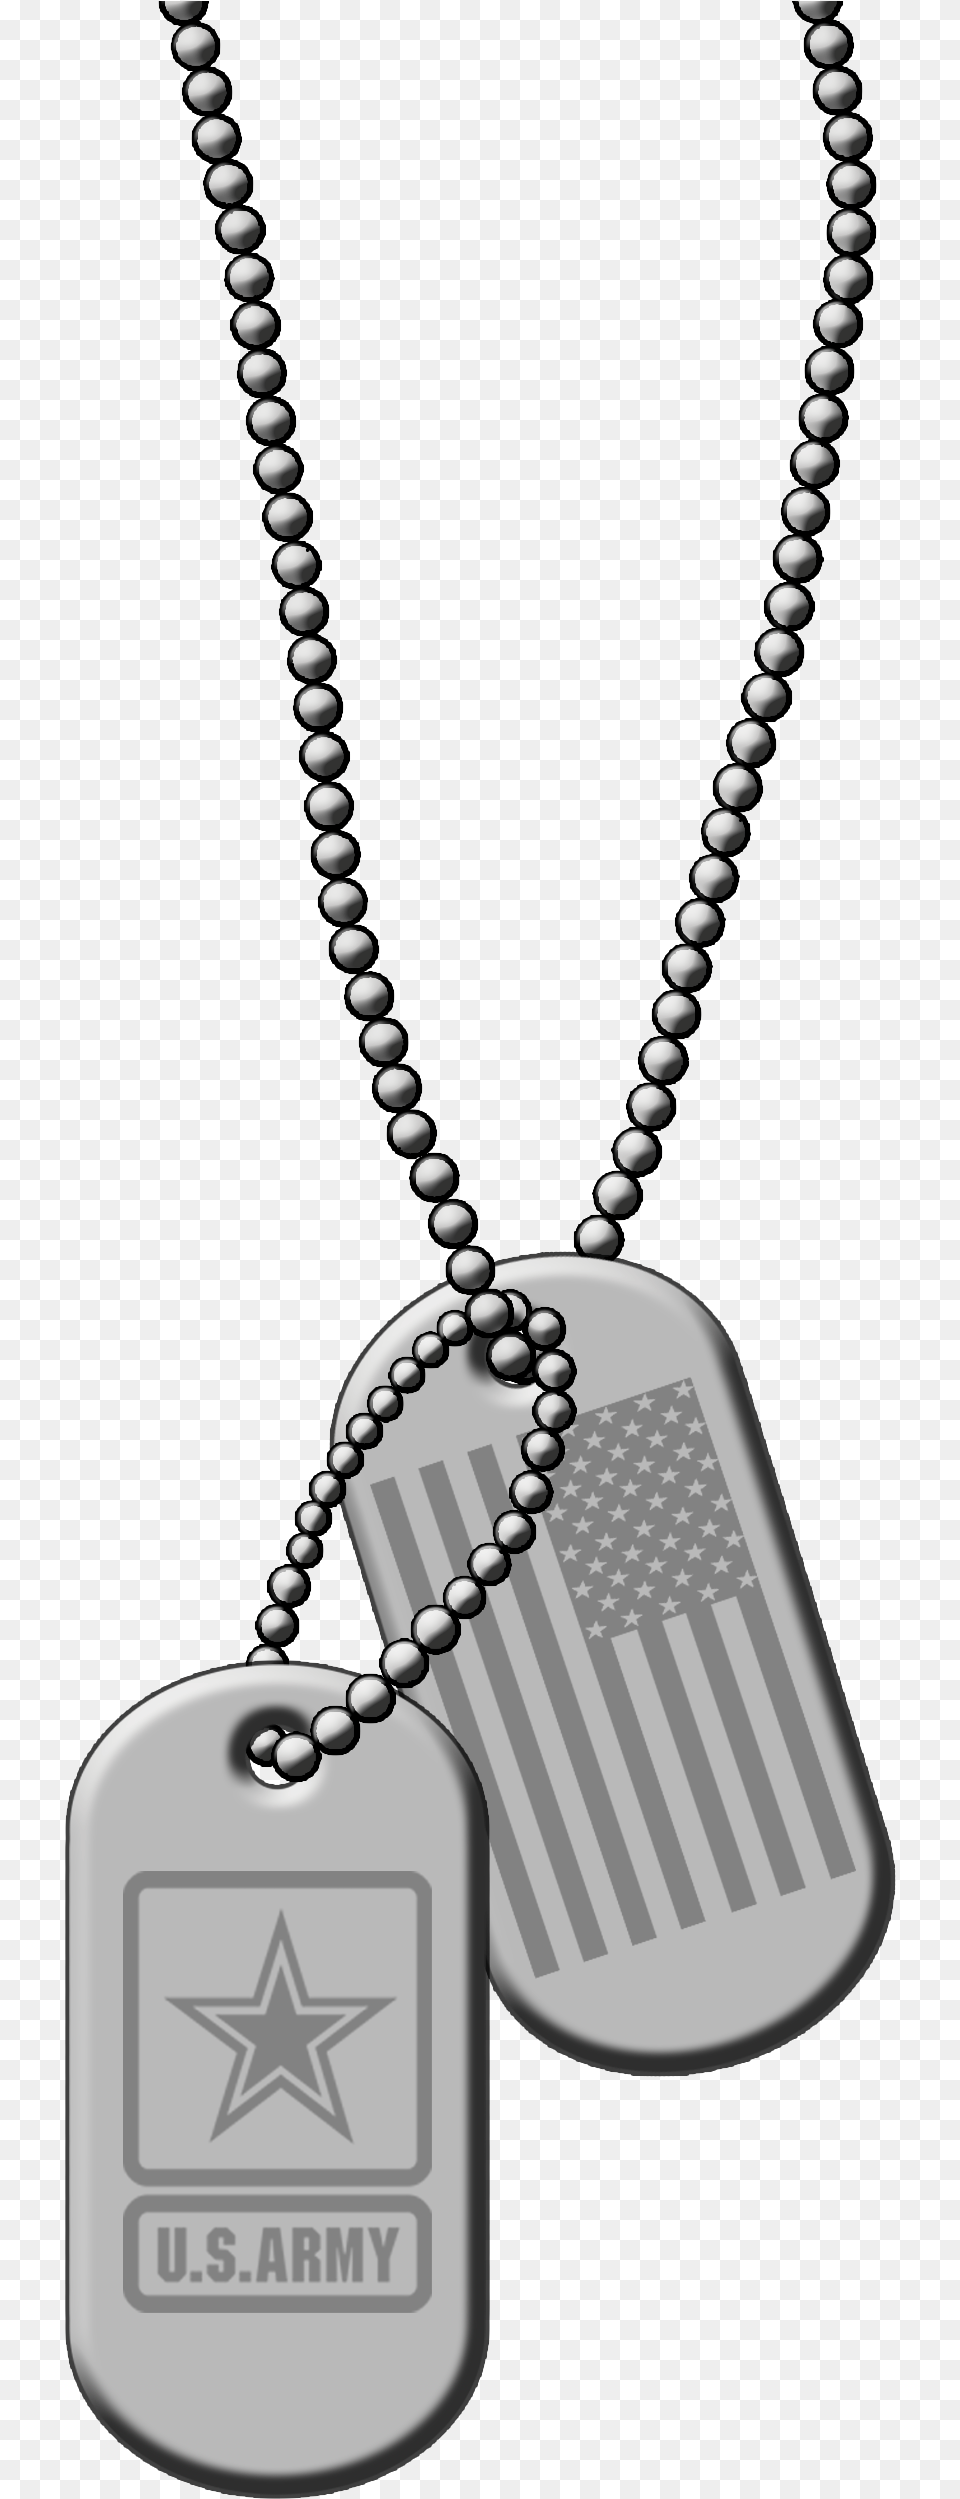 Id Dog Tags Silver Metal Clip Art Vector Us Army Army Dog Tags, Accessories, Jewelry, Necklace Png Image